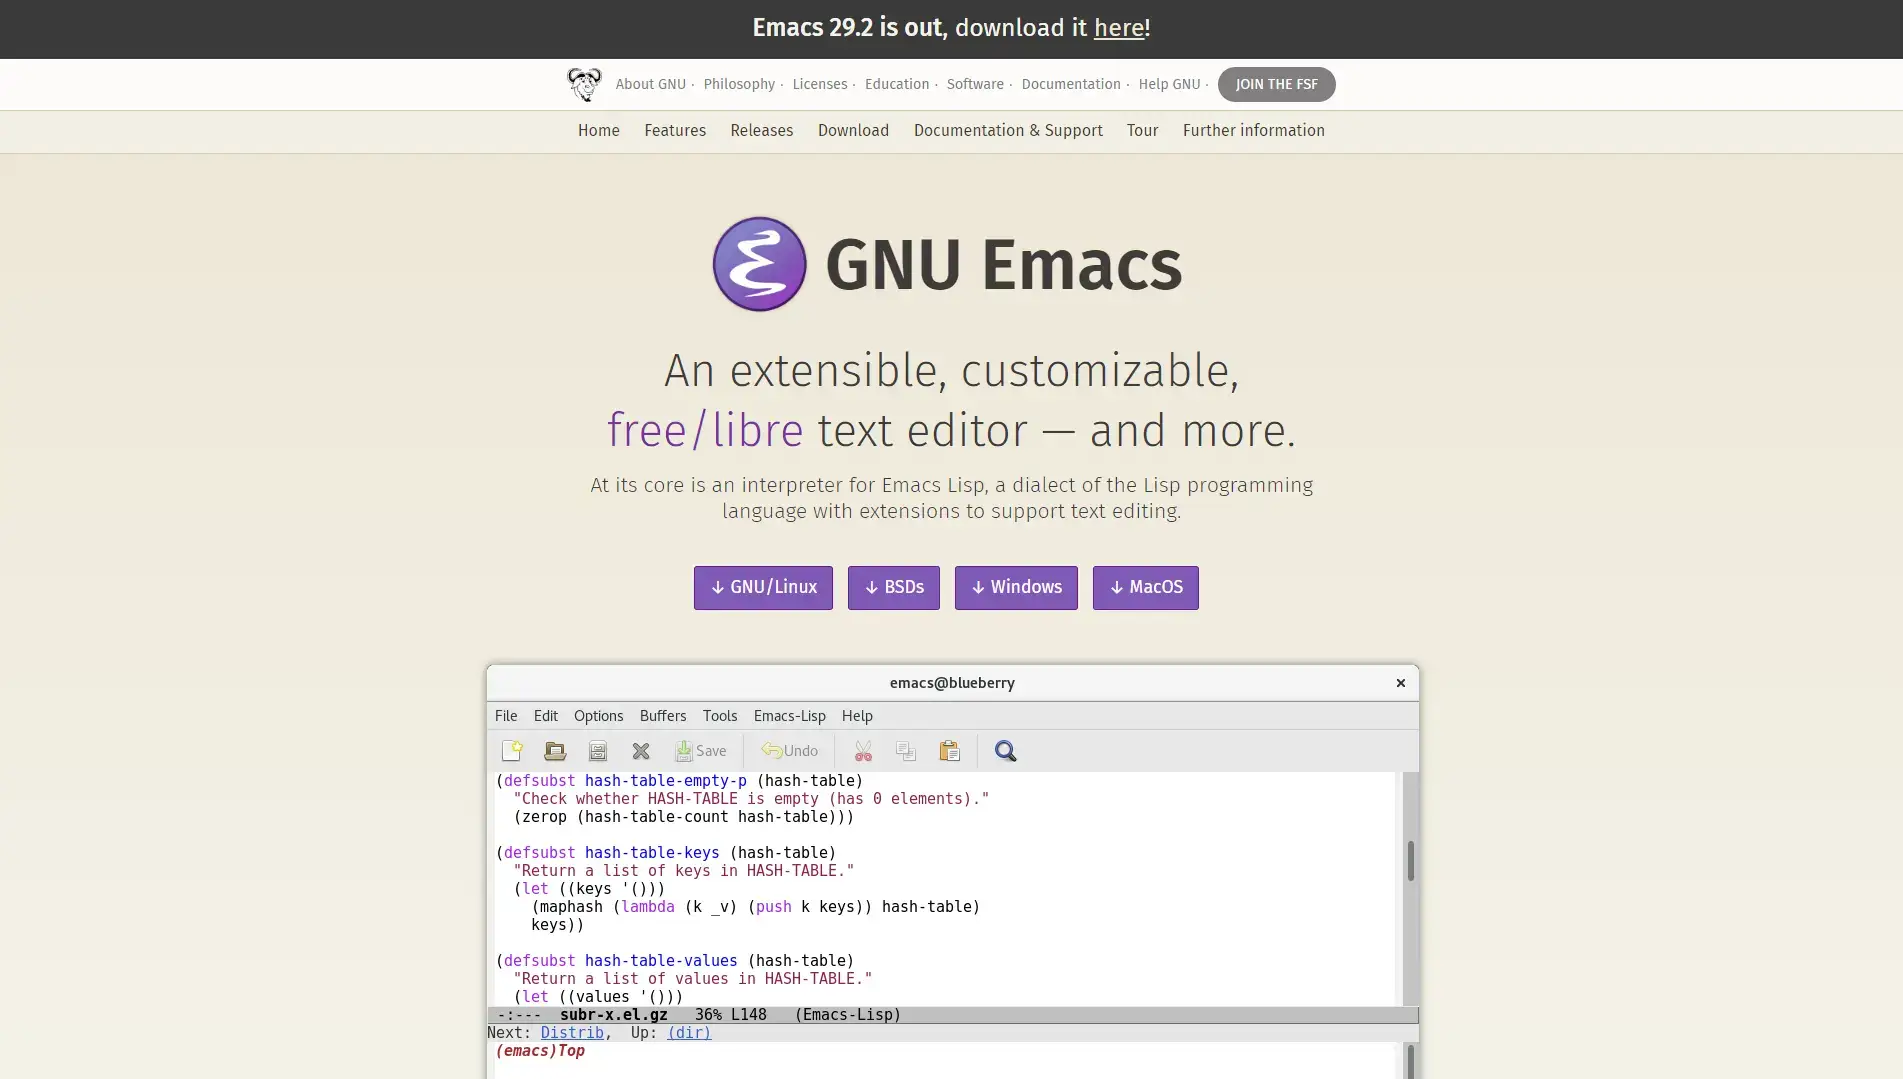 Image of Emacs official website page.